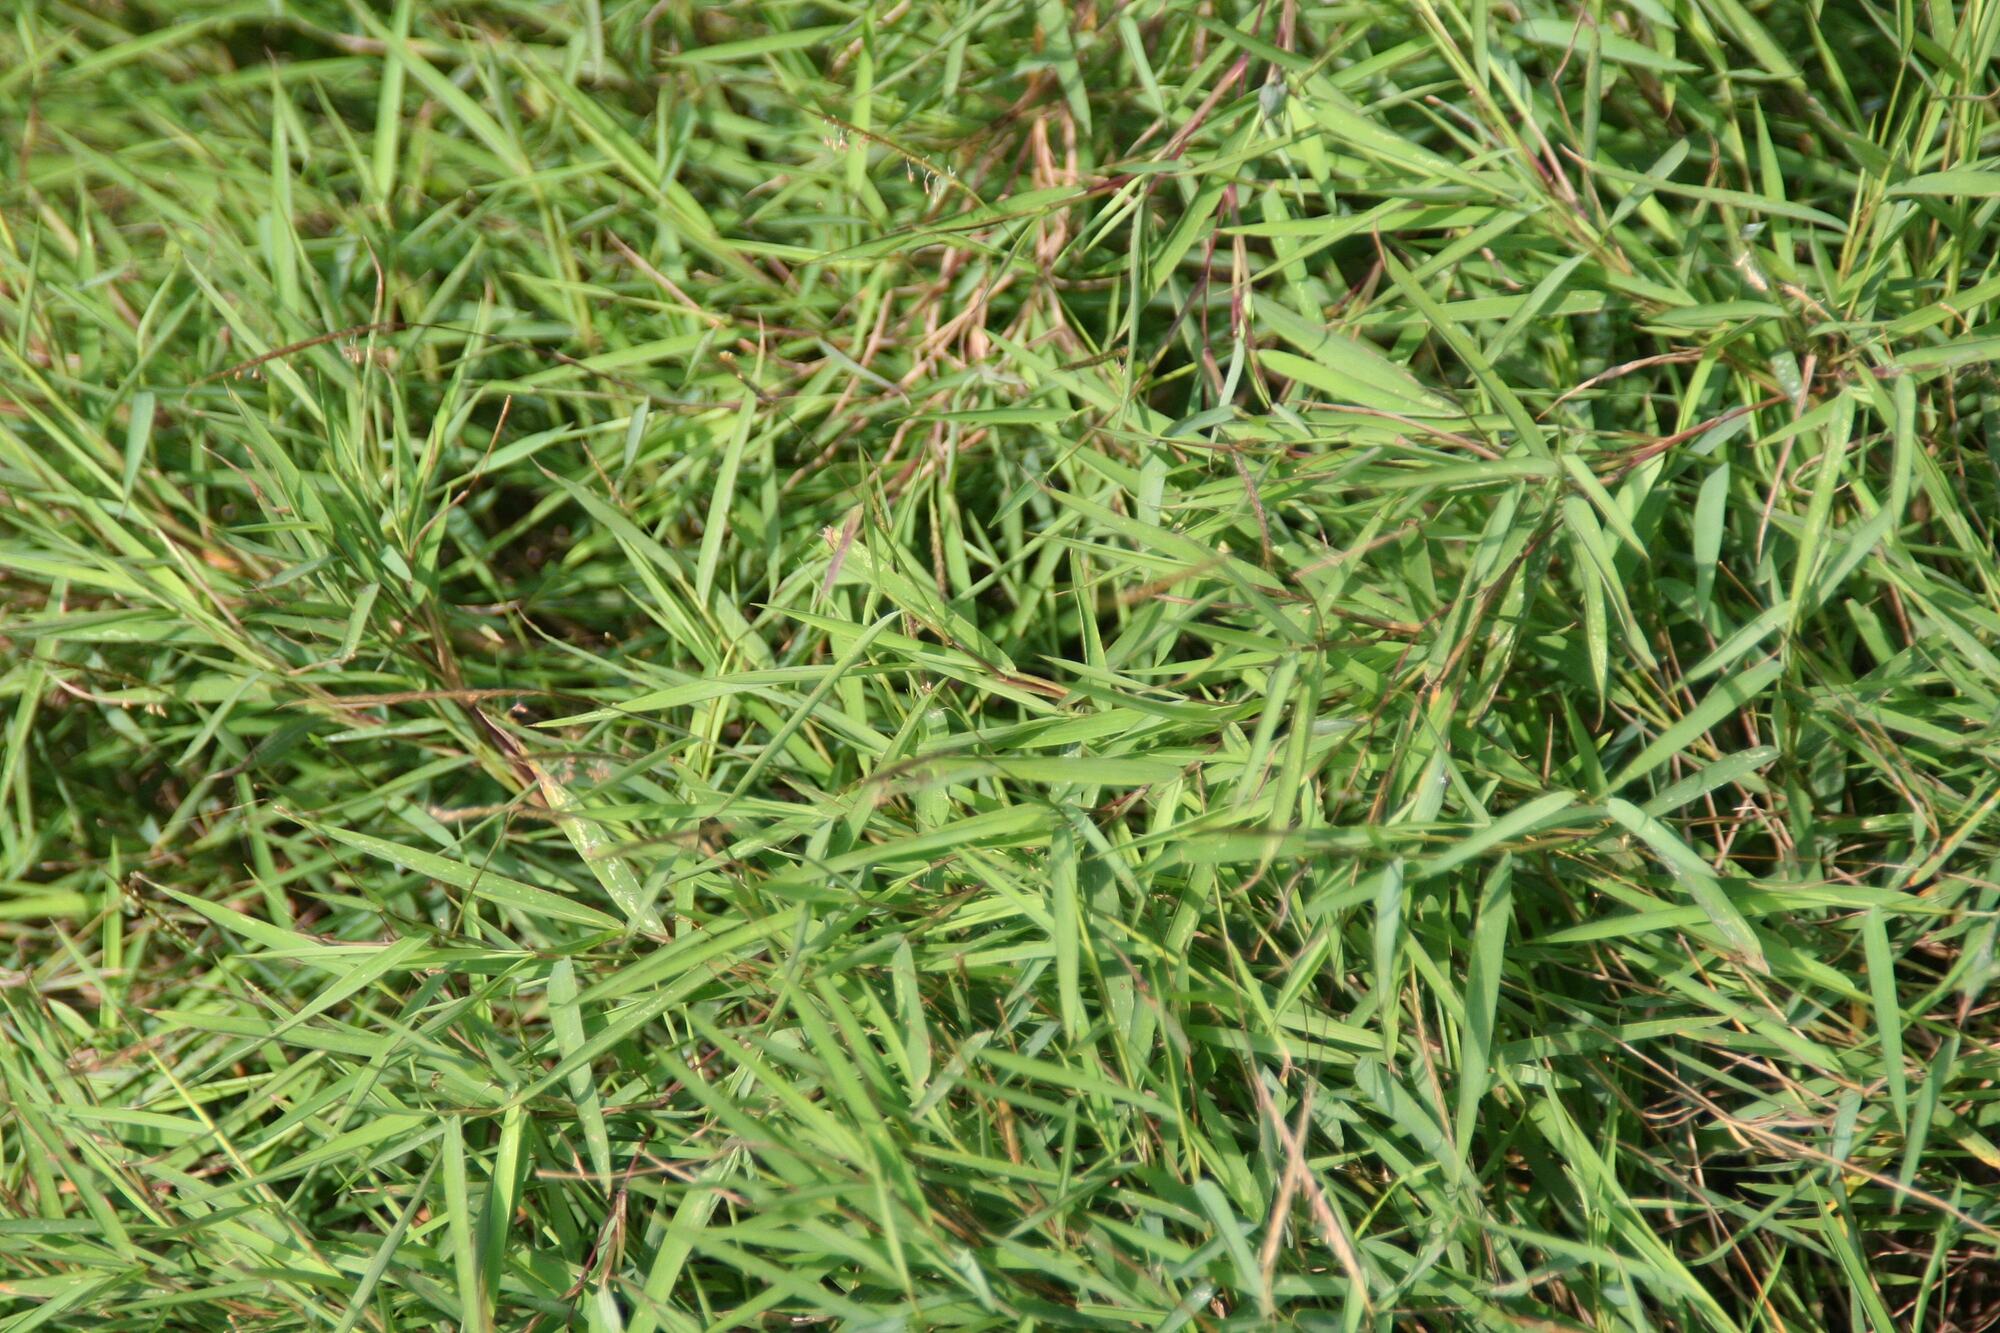 Photograph showing a close up of baby bamboo grass. The long, slender leaves can be observed.